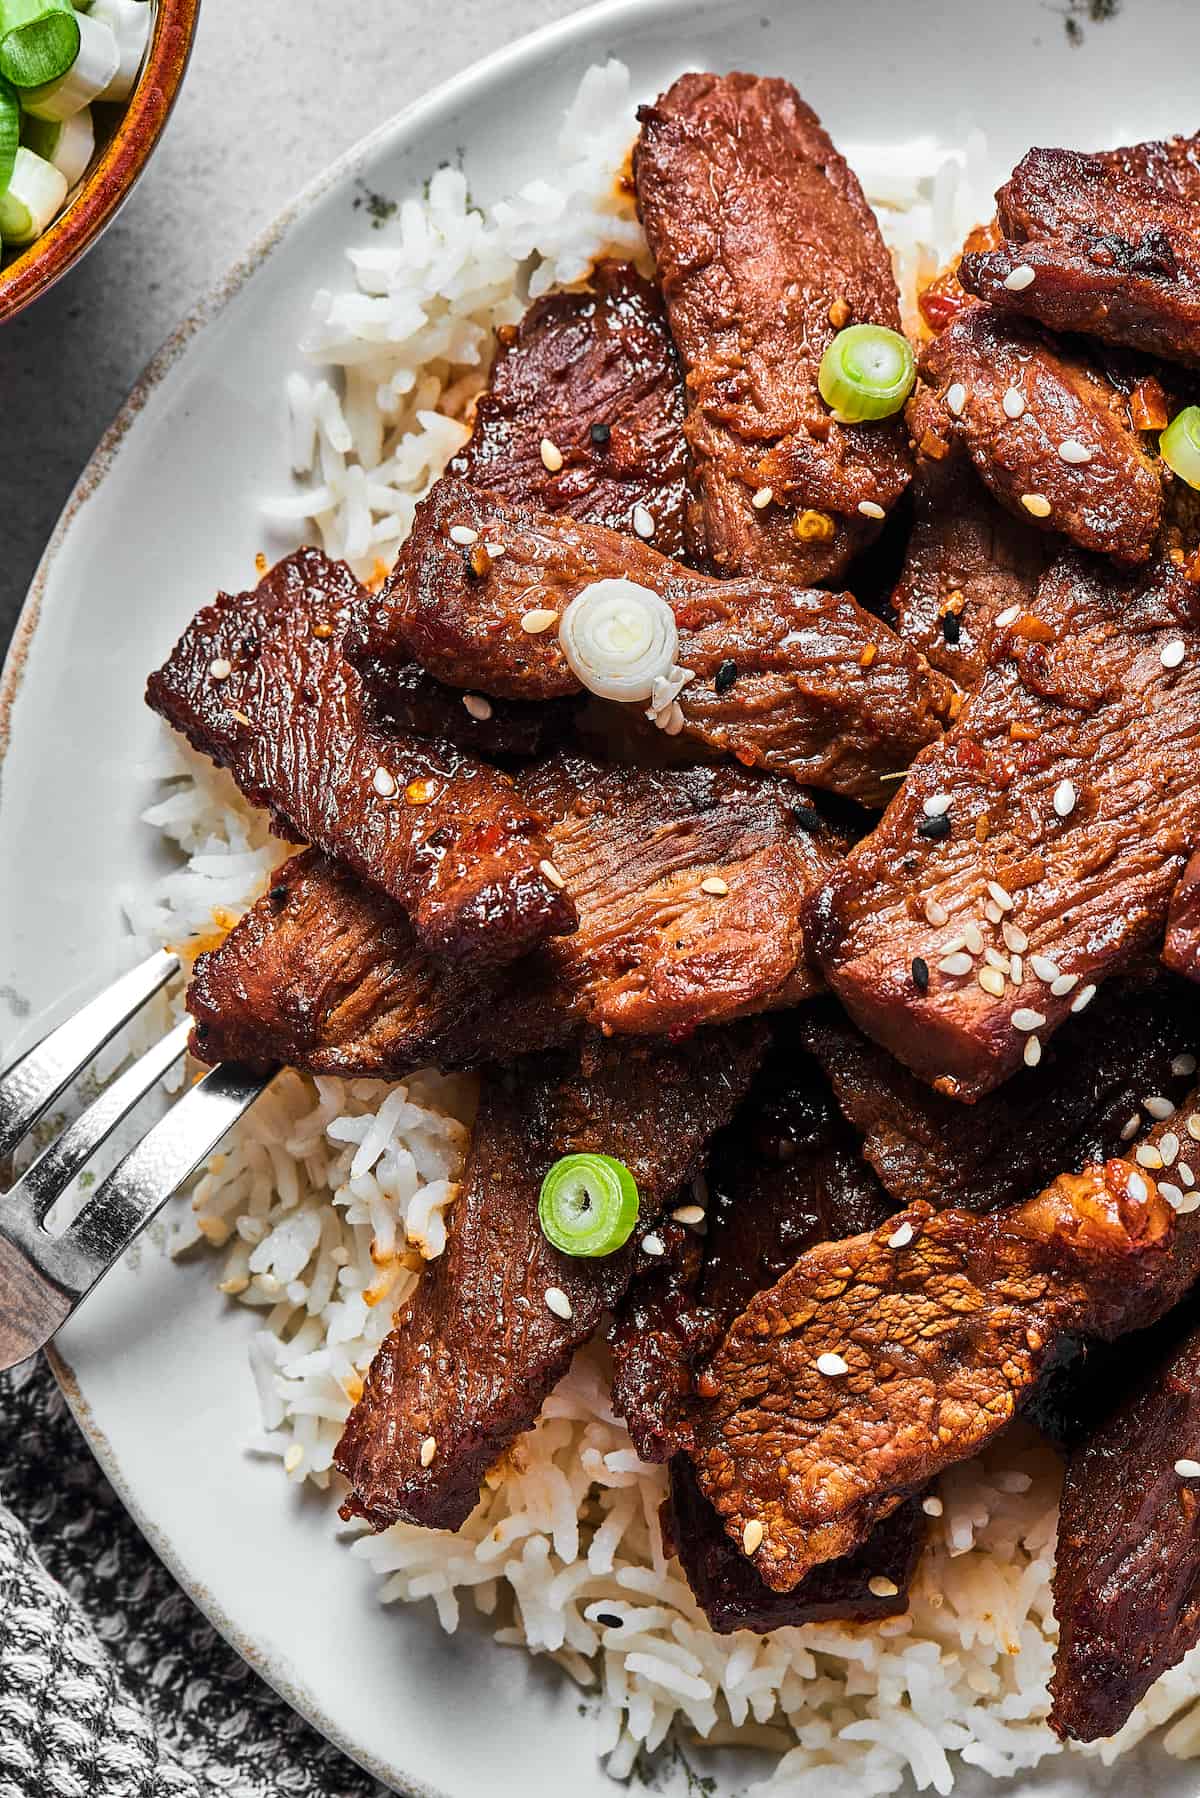 Korean BBQ steak slices on a plate of rice.